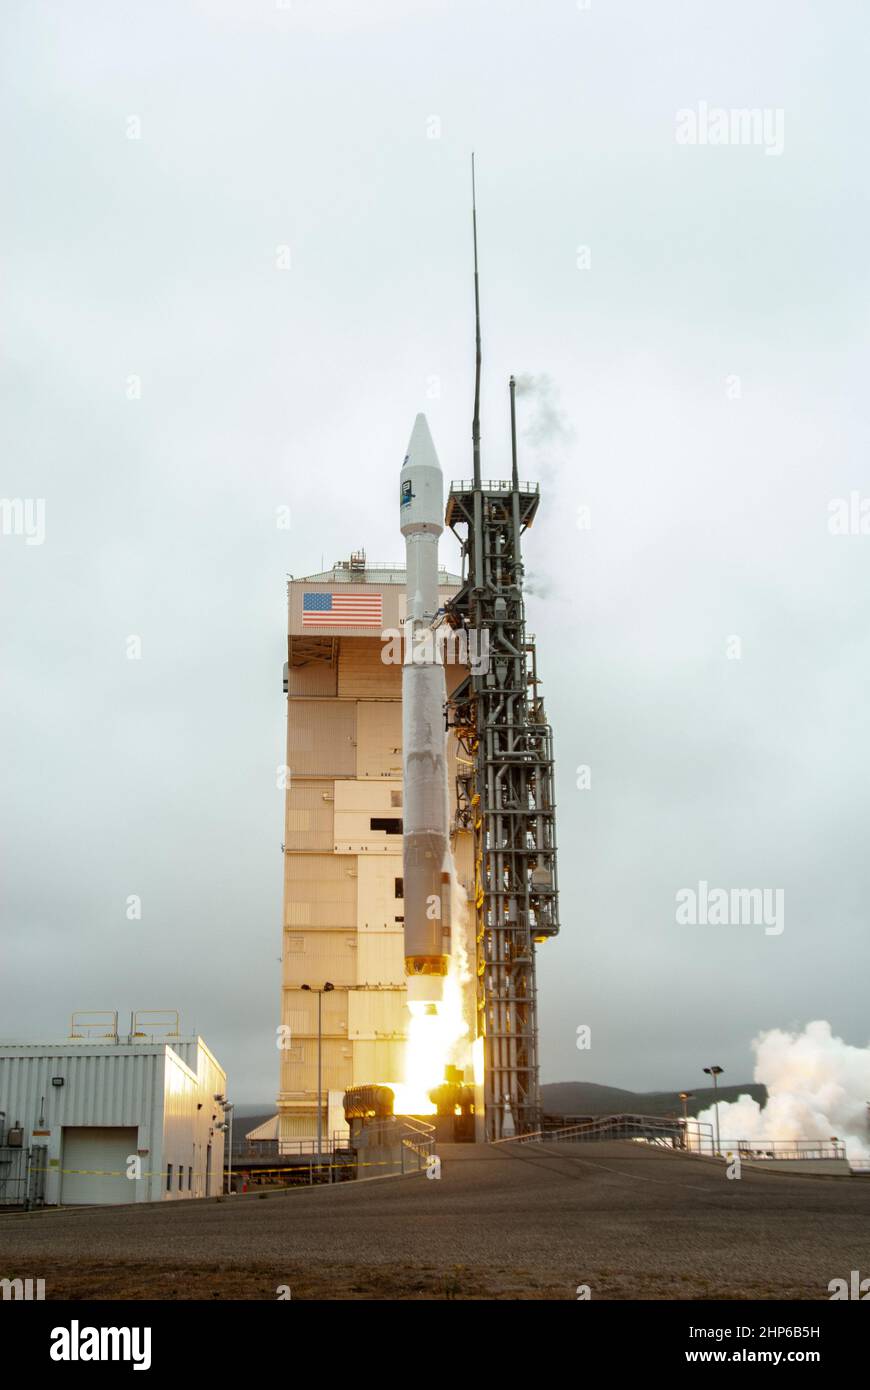 NASA’s Landsat 9 satellite launches on a United Launch Alliance Atlas V 401 rocket from Space Launch Complex 3 at Vandenberg Space Force Station in California on Sept. 27, 2021. Launch time was 2:11 p.m. EDT (11:11 a.m. PDT). The launch is managed by NASA’s Launch Services Program, based at the agency’s Kennedy Space Center in Florida. Landsat 9 will join its sister satellite, Landsat 8, in orbit in collecting images from across the planet every eight days. Stock Photo